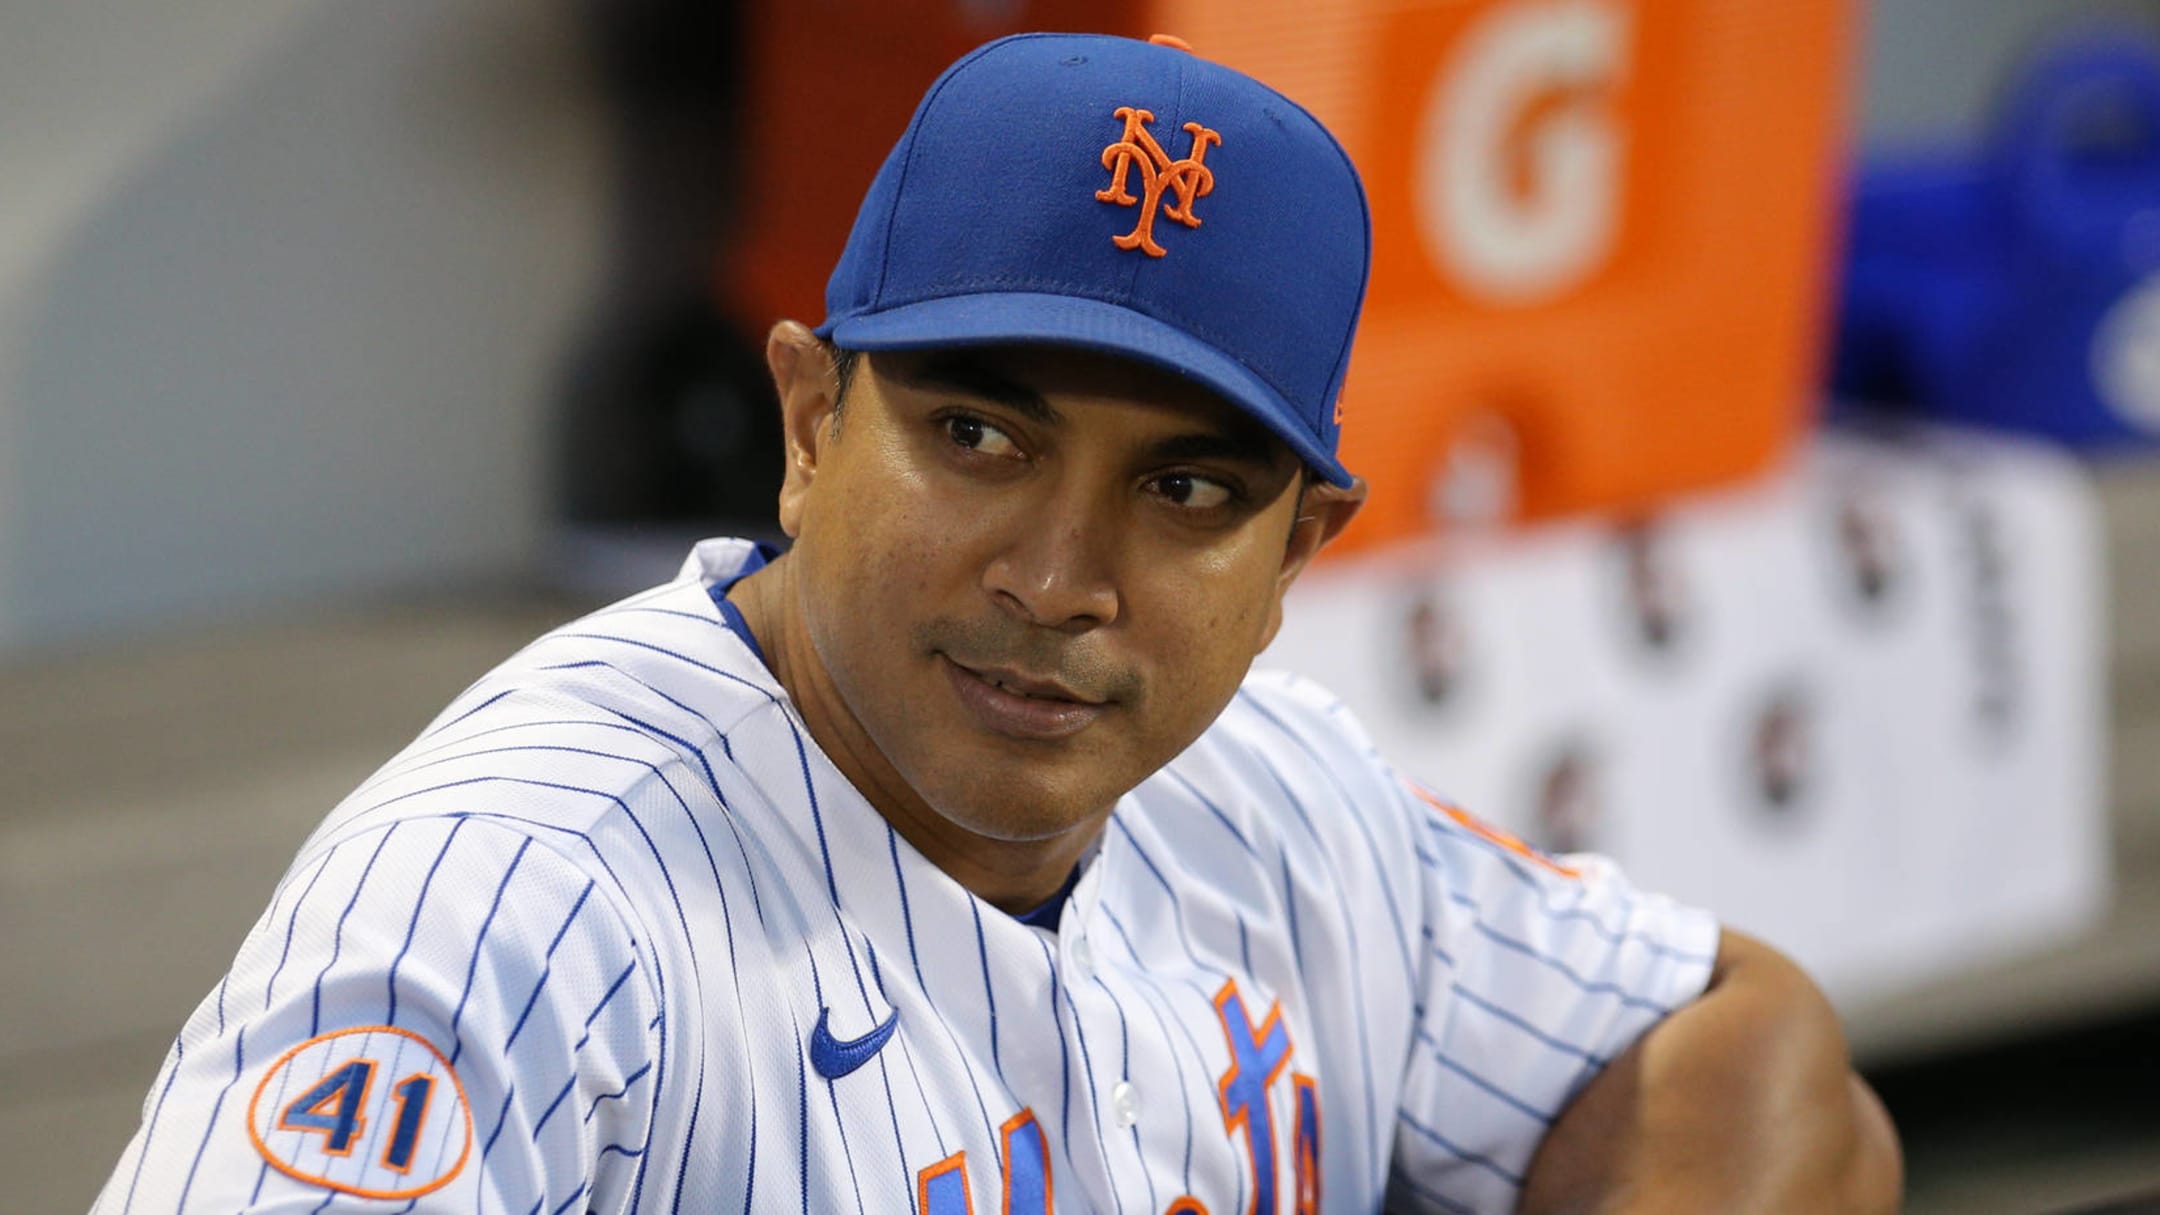 Yankees hire former Mets manager Luis Rojas as 3B coach